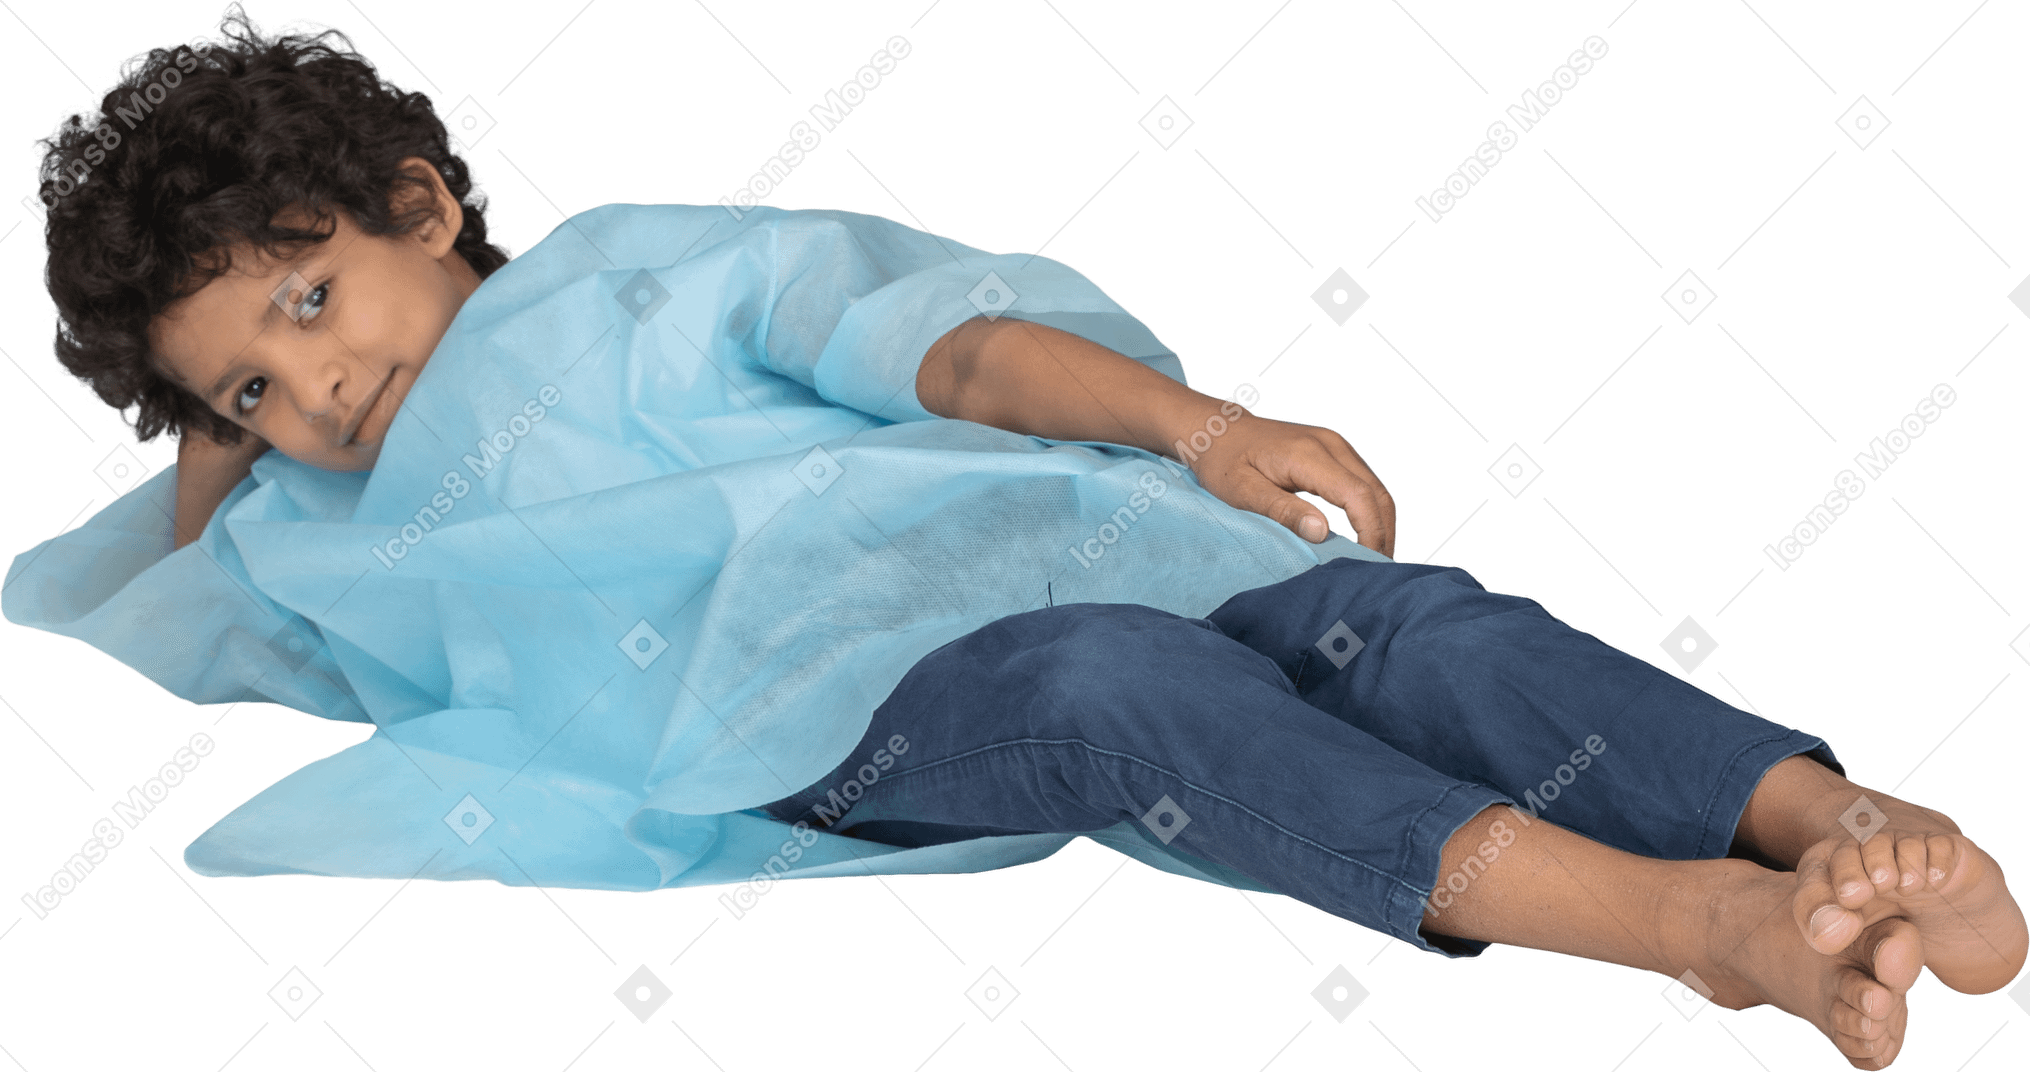 Smiling boy lying on table